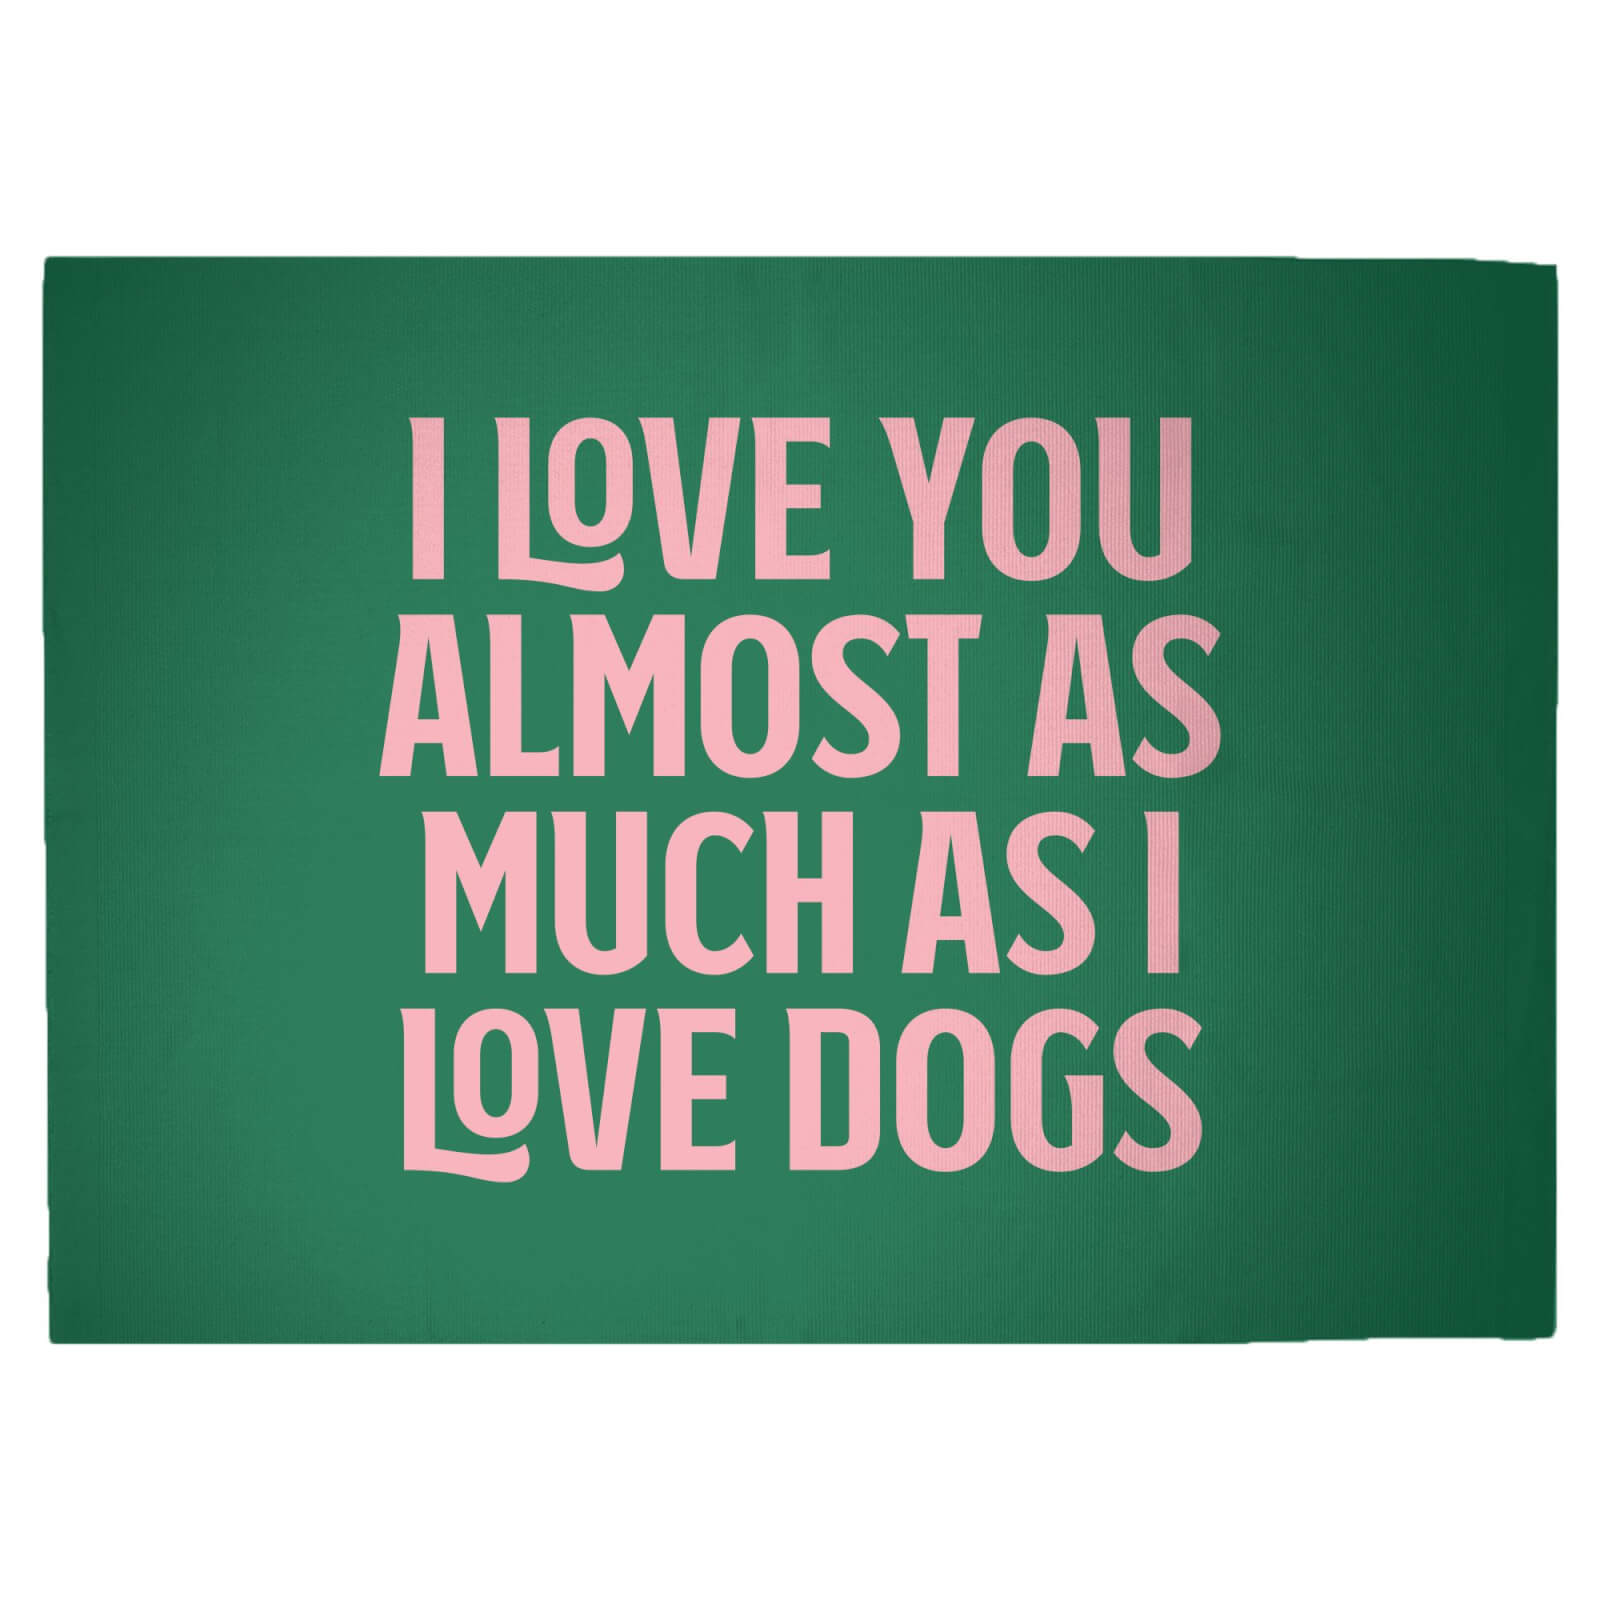 I Love You Almost As Much As I Love Dogs Woven Rug - Large